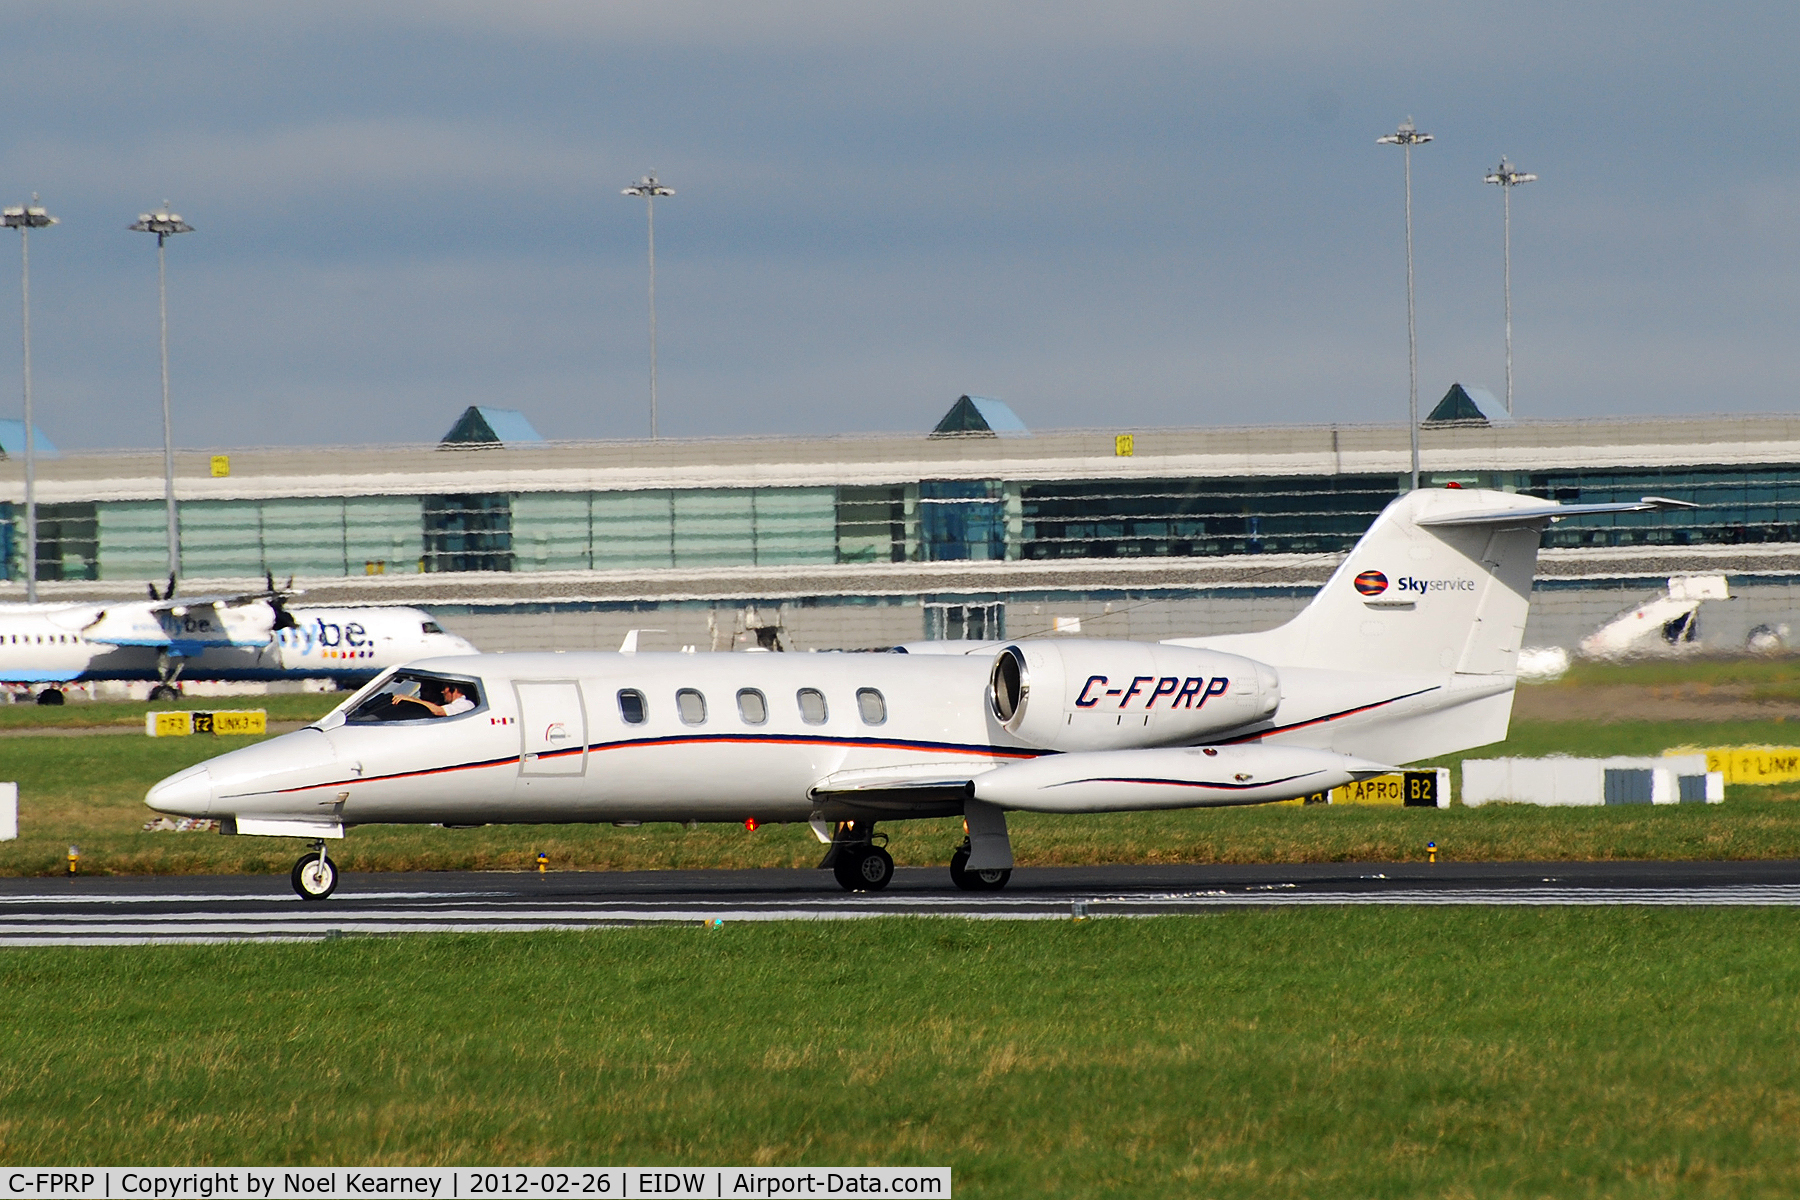 C-FPRP, 1981 Learjet 35A C/N 390, Lining up for departure off Rwy28 at EIDW.